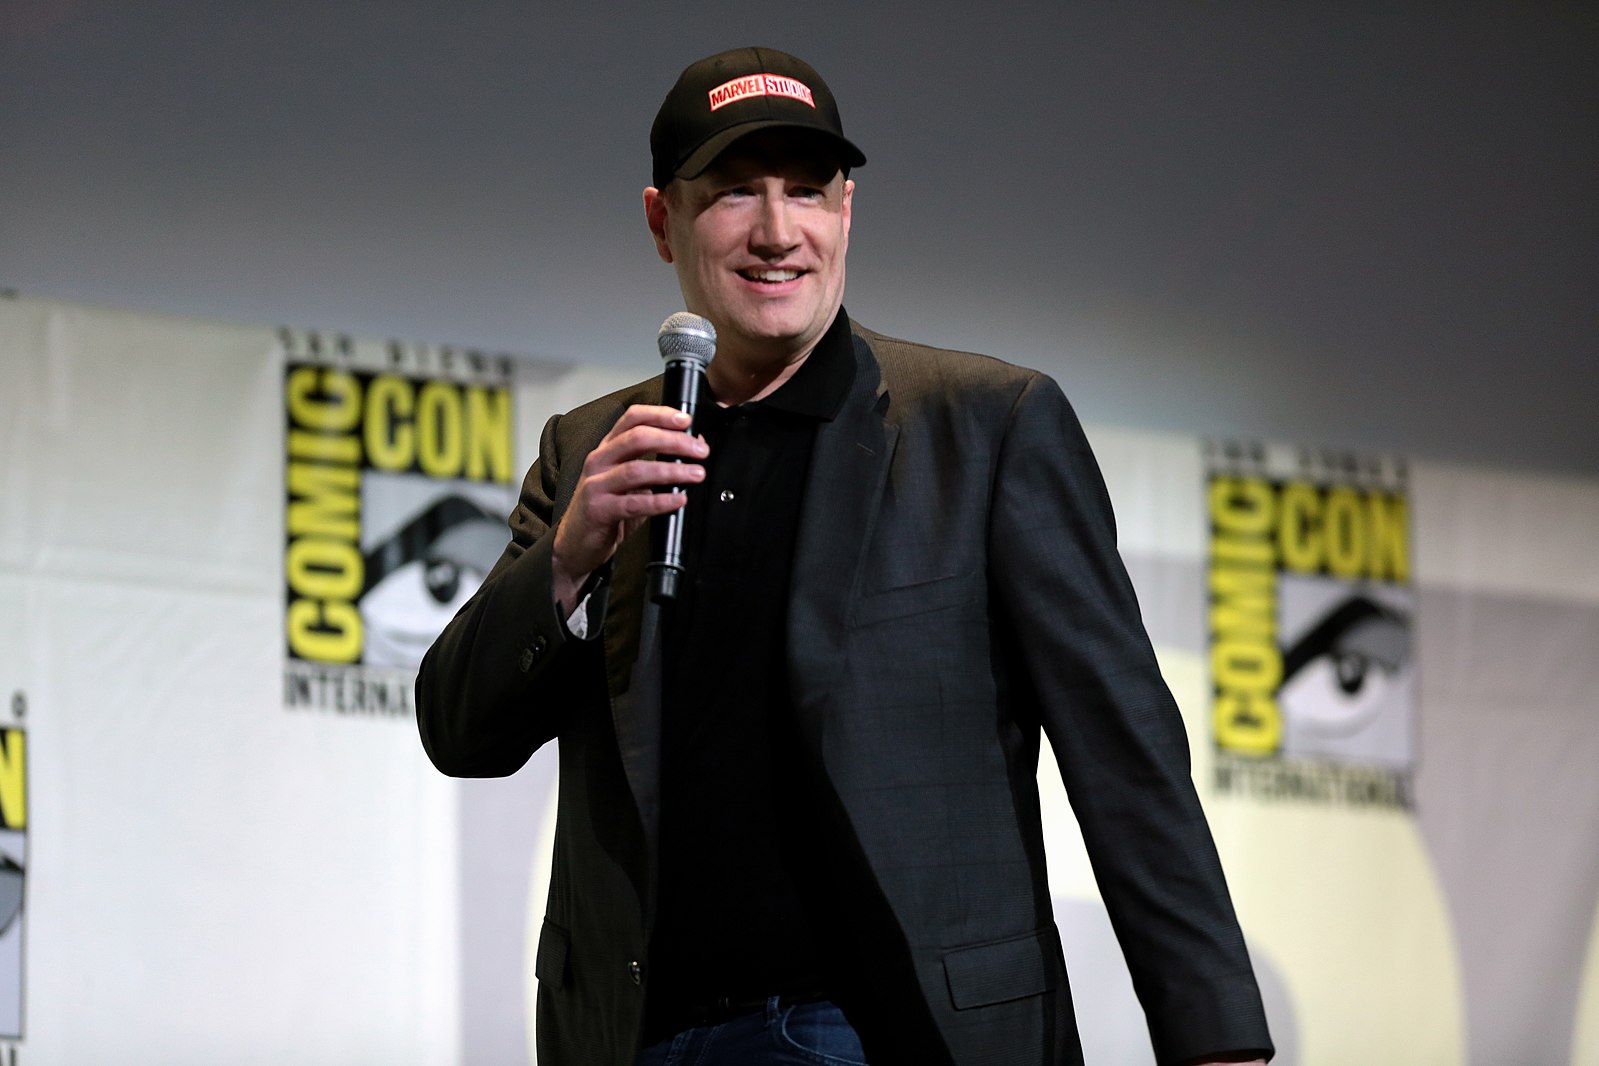 Feige Explains Marvel Movies Delay - Not Sure I Buy It